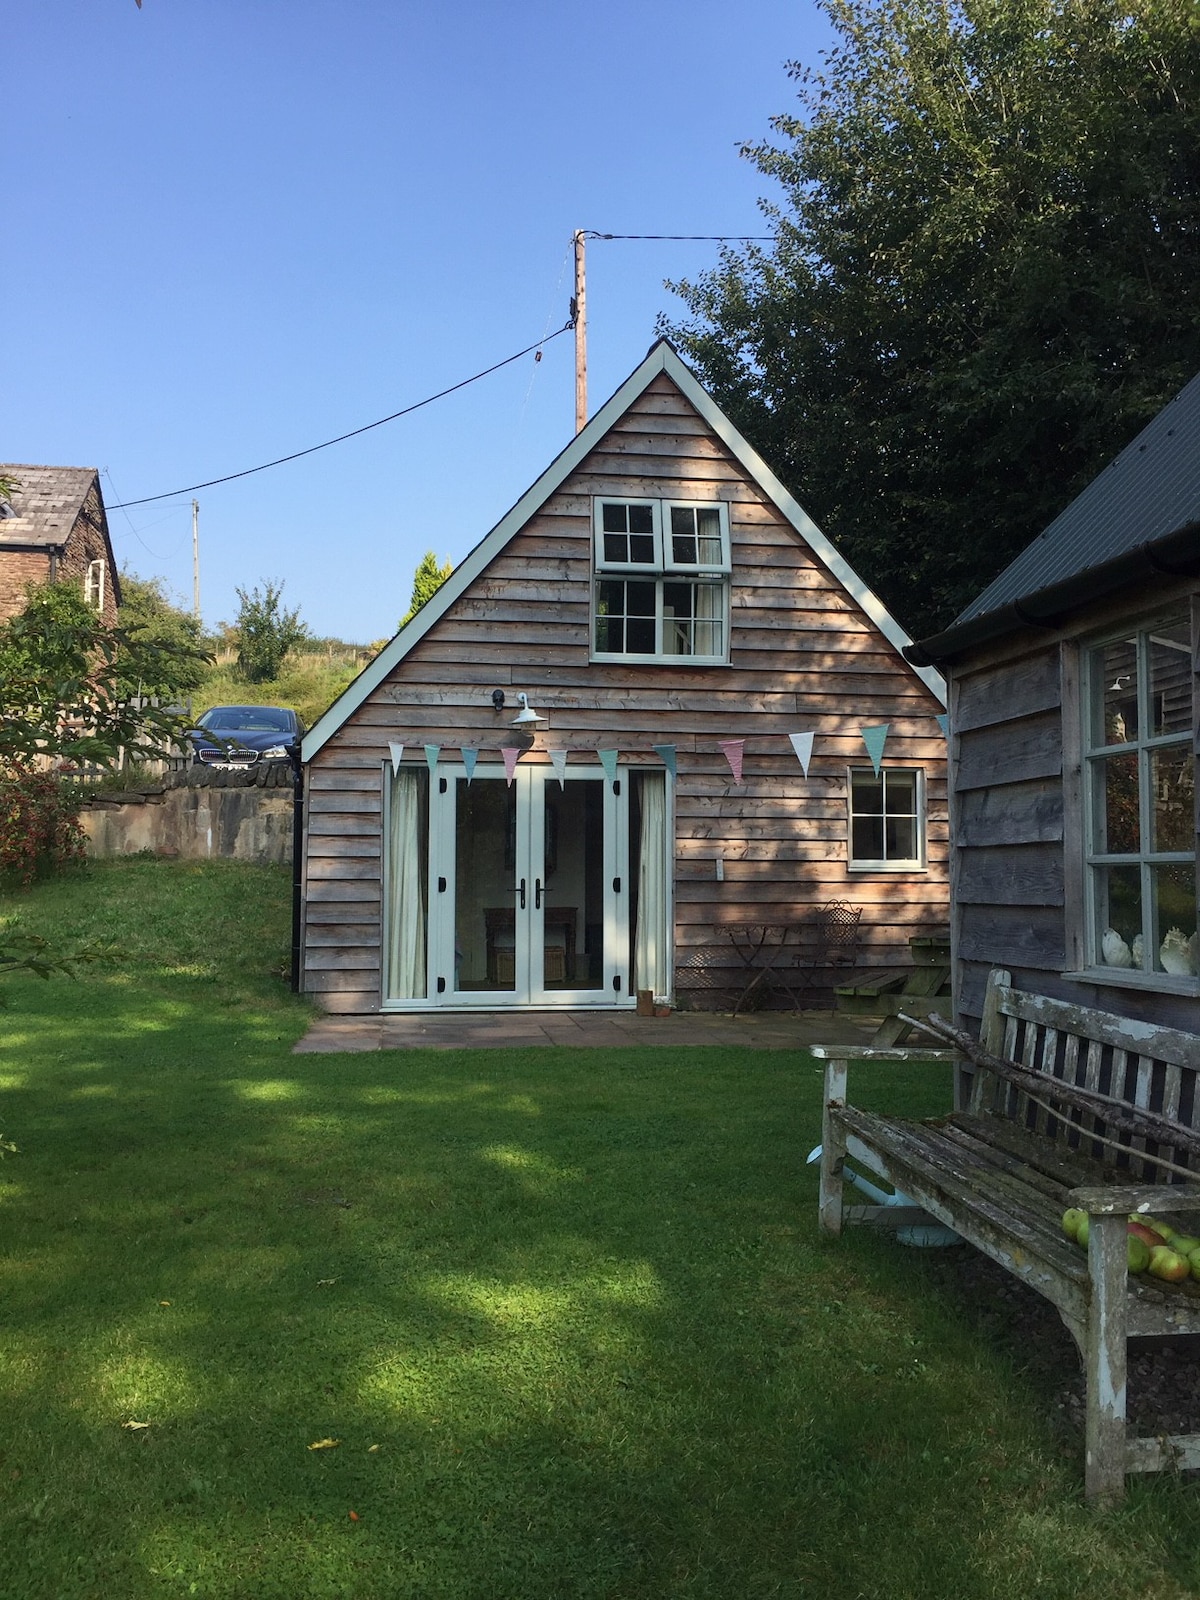 Curlew Cabin - gorgeous B&B hideaway